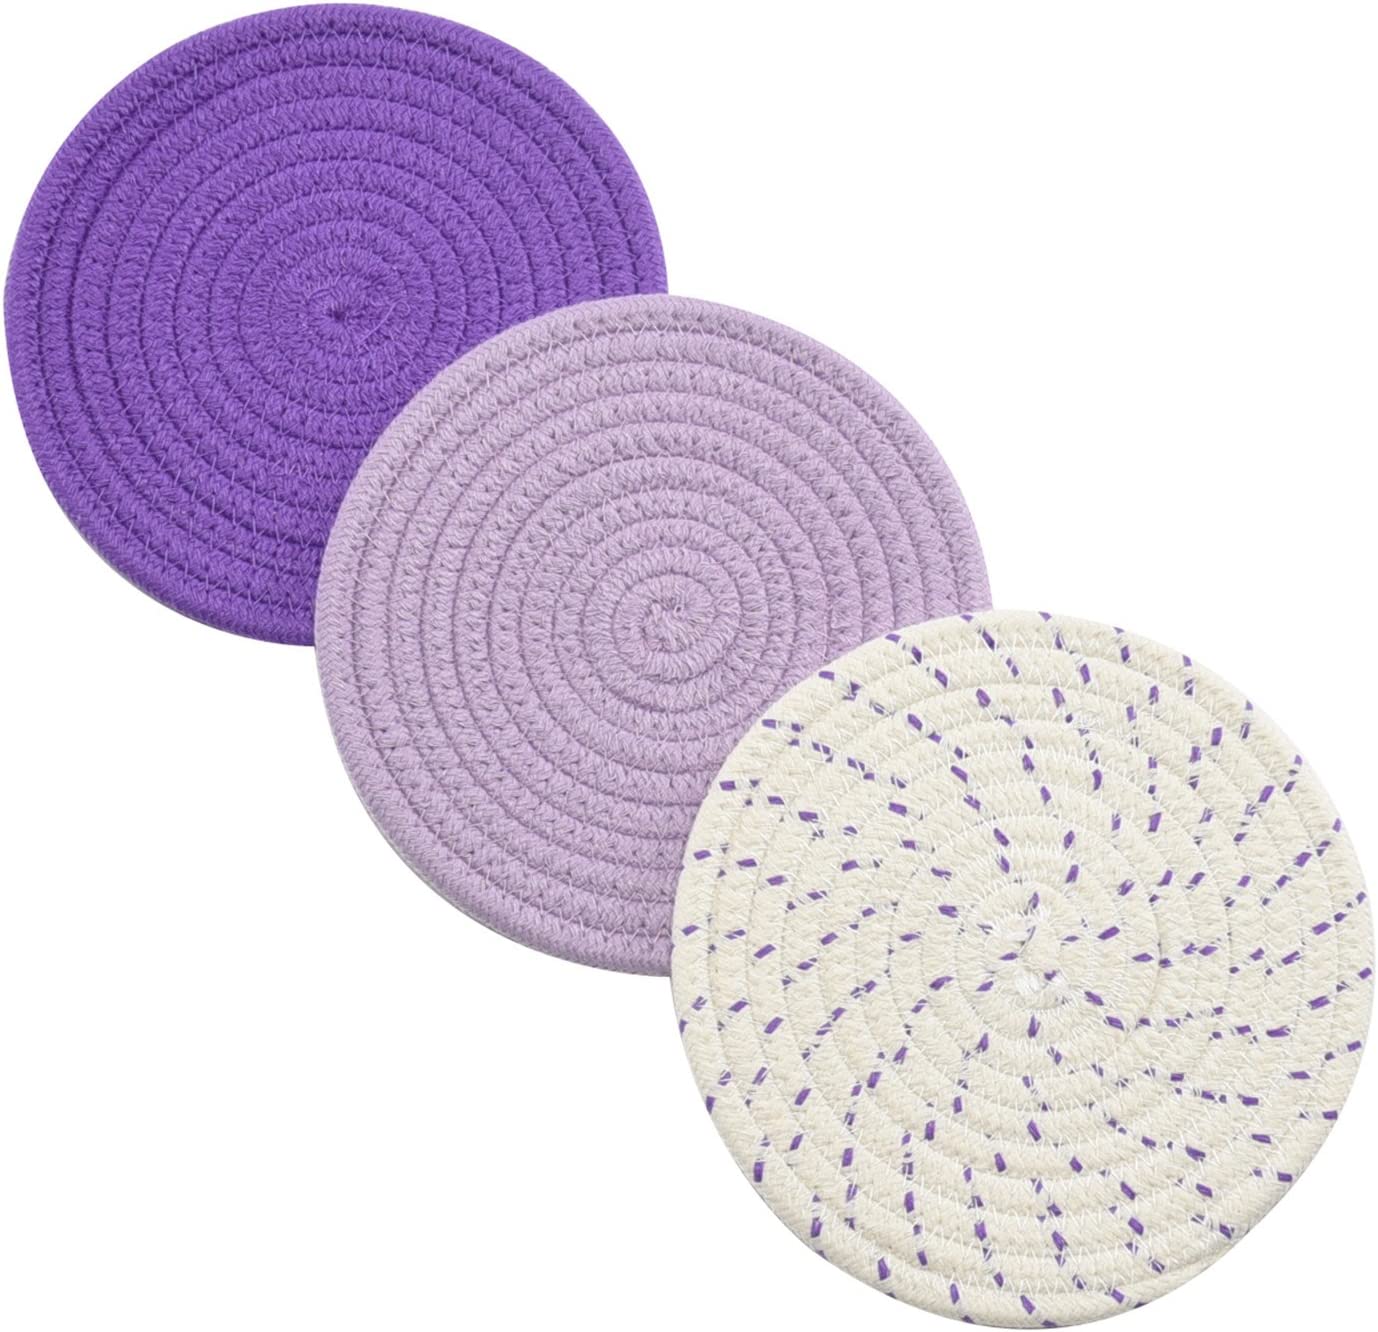 Trivets Set 100% Pure Cotton Thread Weave Hot Pot Holders Set (Set of 3) Stylish Coasters, Hot Pads, Hot Mats,Spoon Rest For Cooking and Baking by Diameter 7 Inches (Gray)